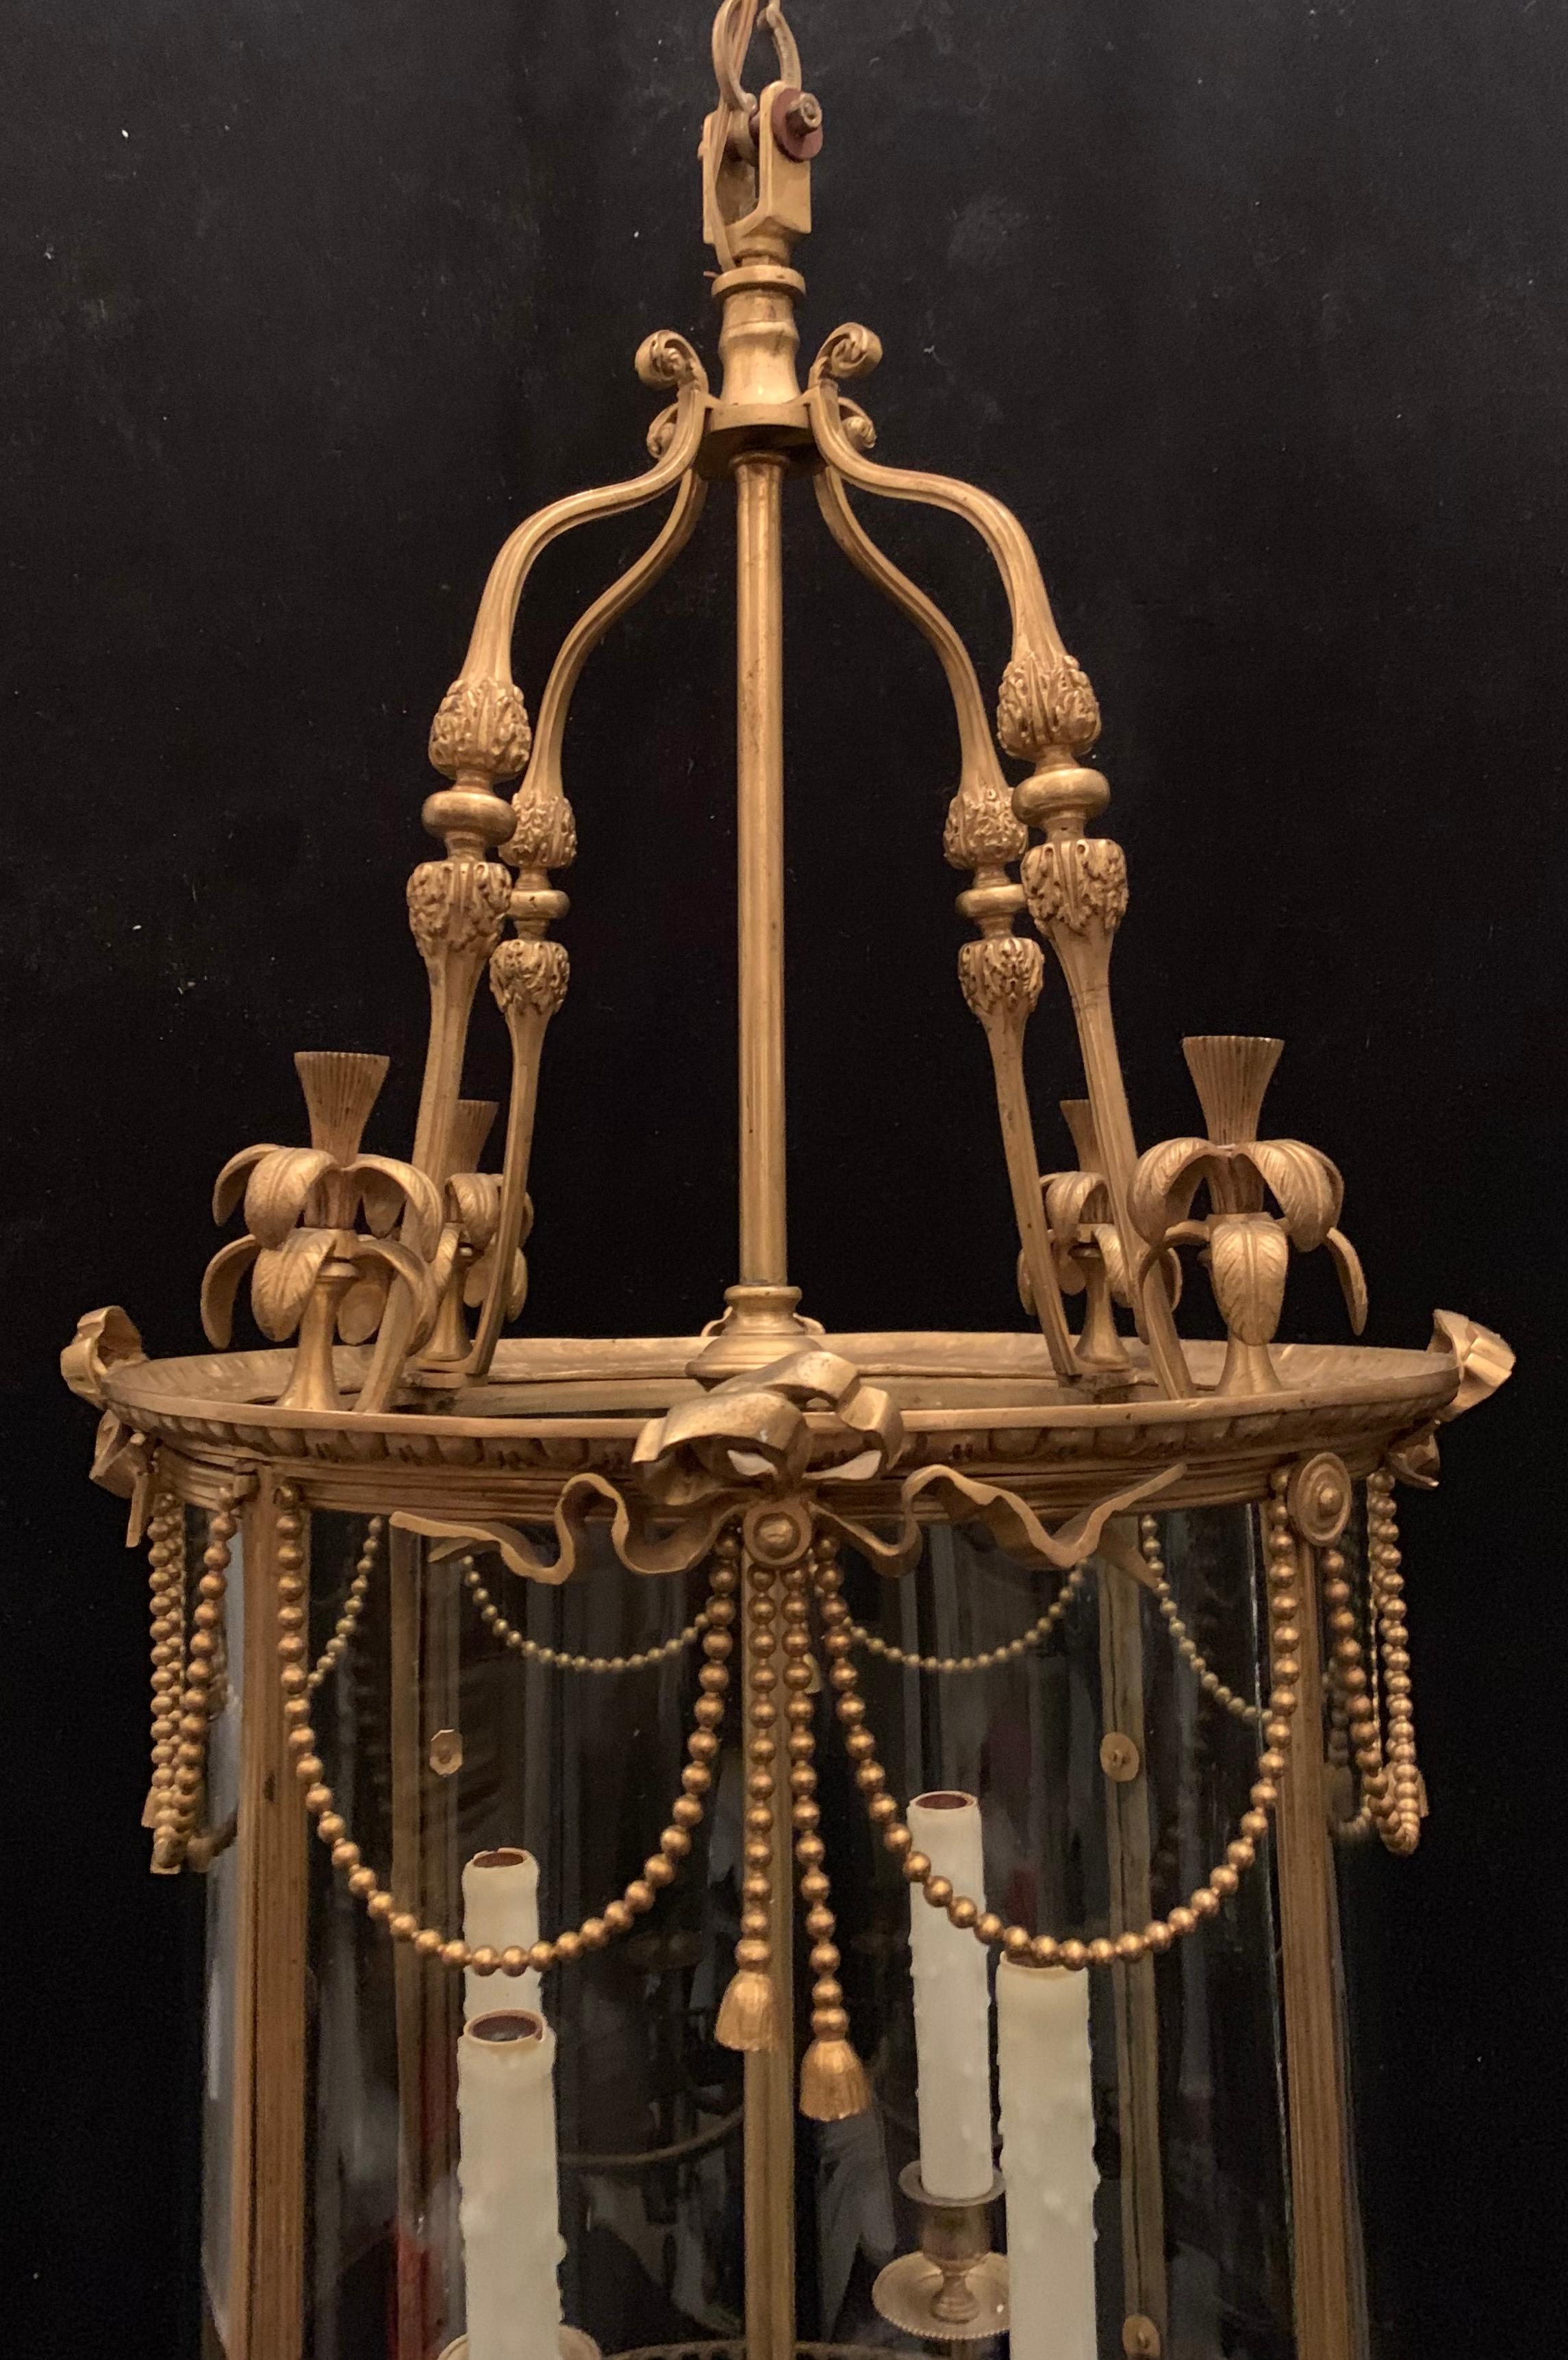 A Wonderful French doré bronze curved glass ormolu-mounted with bows and swags and tassels Lantern 4 candelabra light fixture
Provenance: Sotheby's Auction House New York City
Wiring has been updated, accompanied by chain and canopy as well as